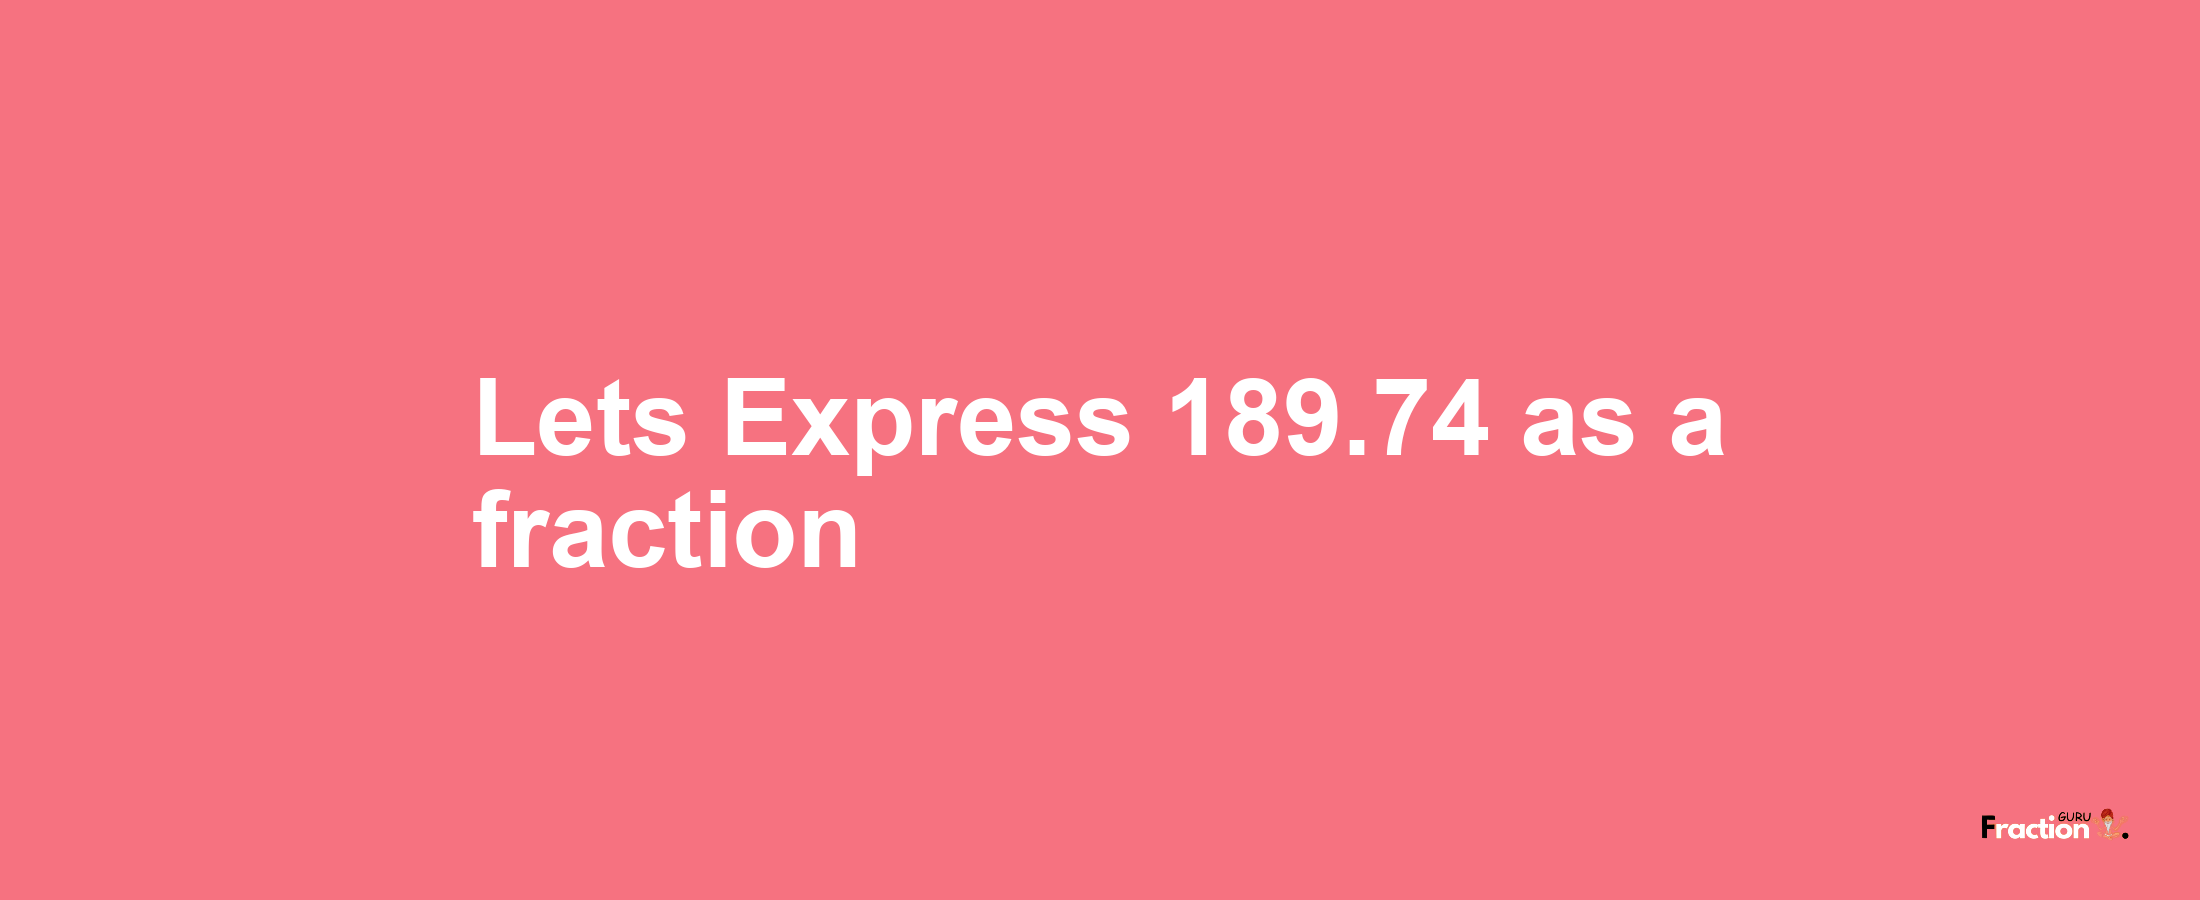 Lets Express 189.74 as afraction